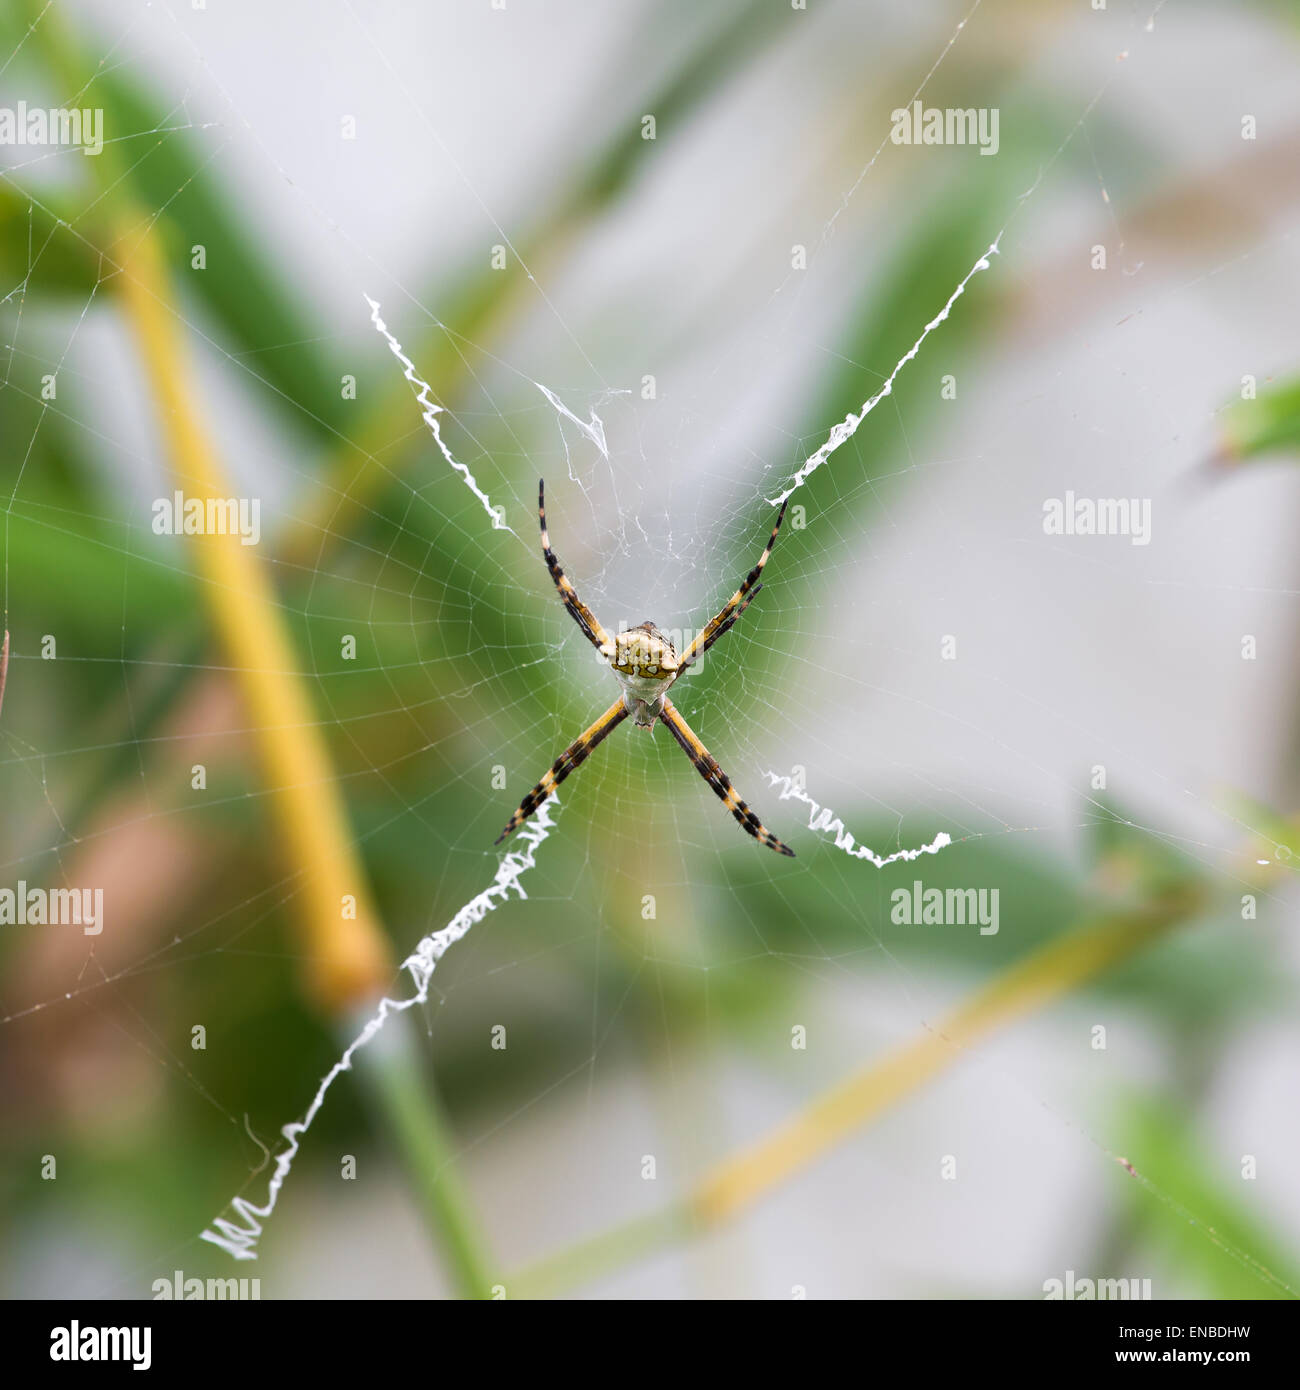 Black and Yellow Argiope spider on web in the garden Stock Photo